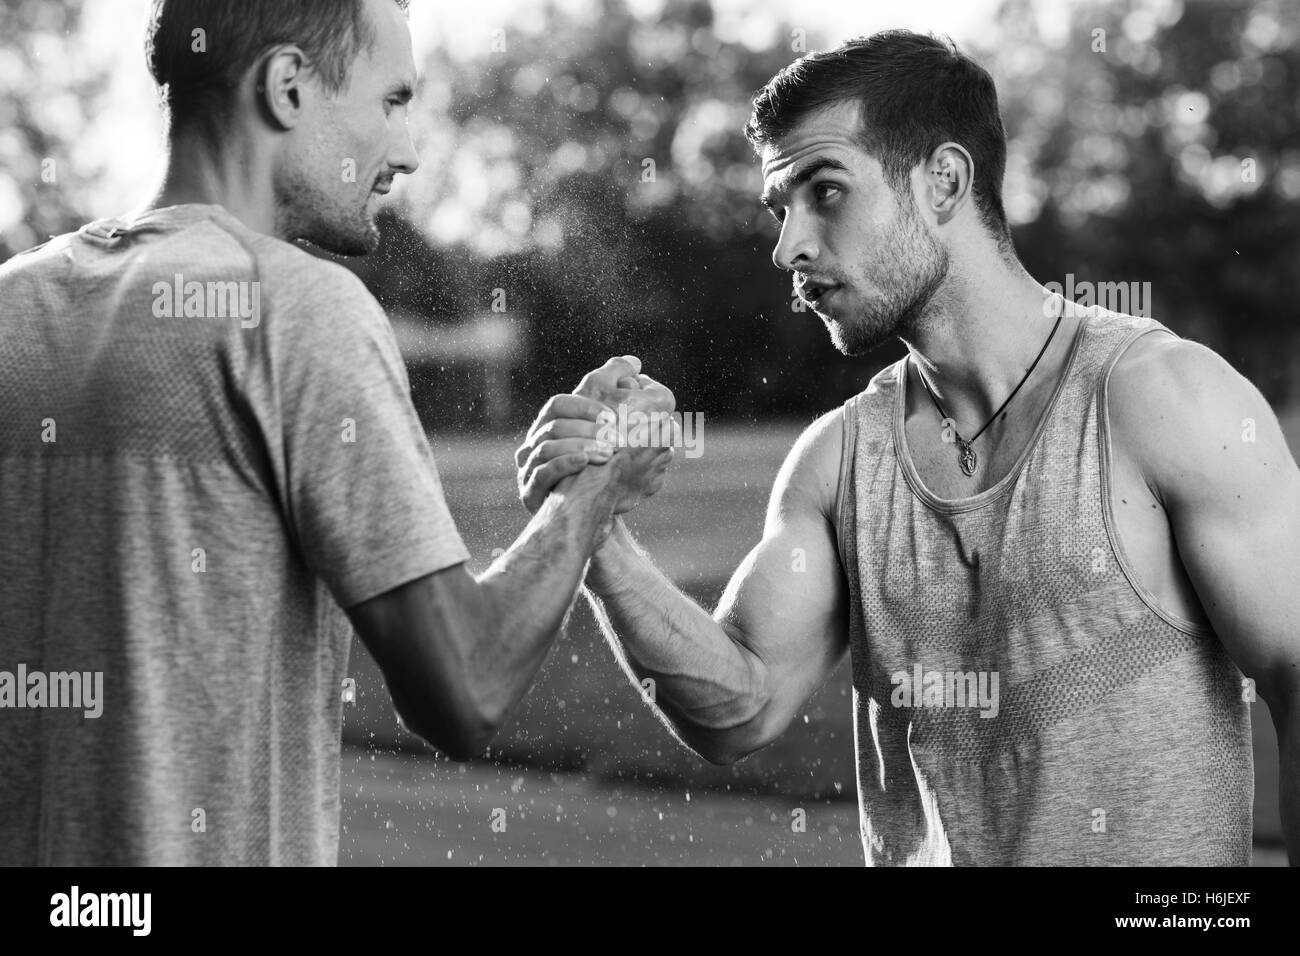 Black and white portrait of handsome men with arm wrestling Stock Photo